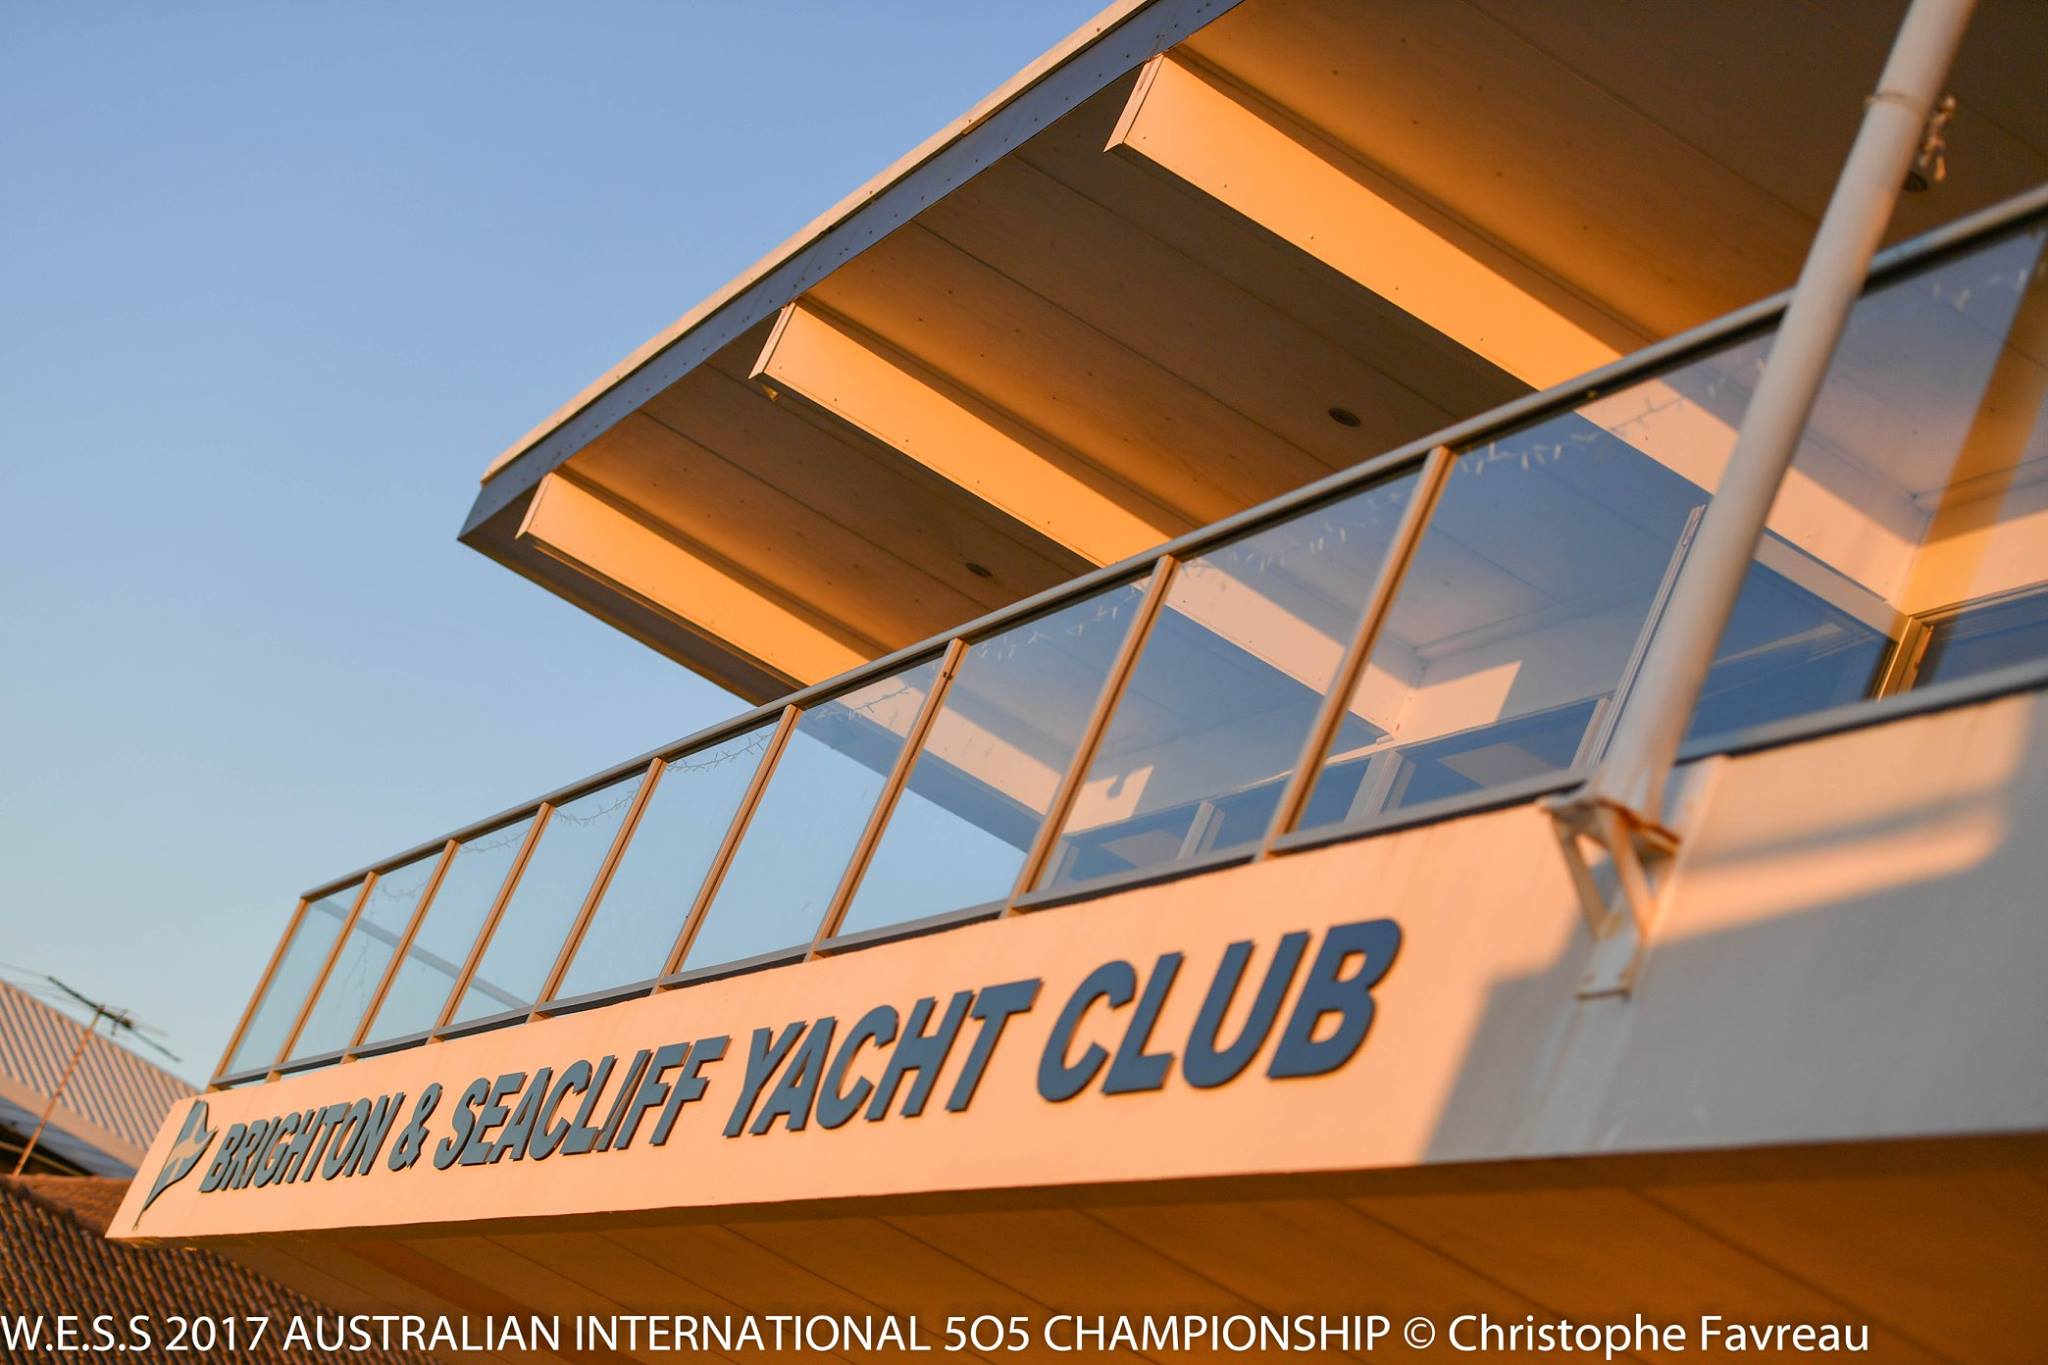 The Brighton and Seacliff Yacht Club is a beautiful part of the Adelaide coastline. Photos: Christophe Favreau